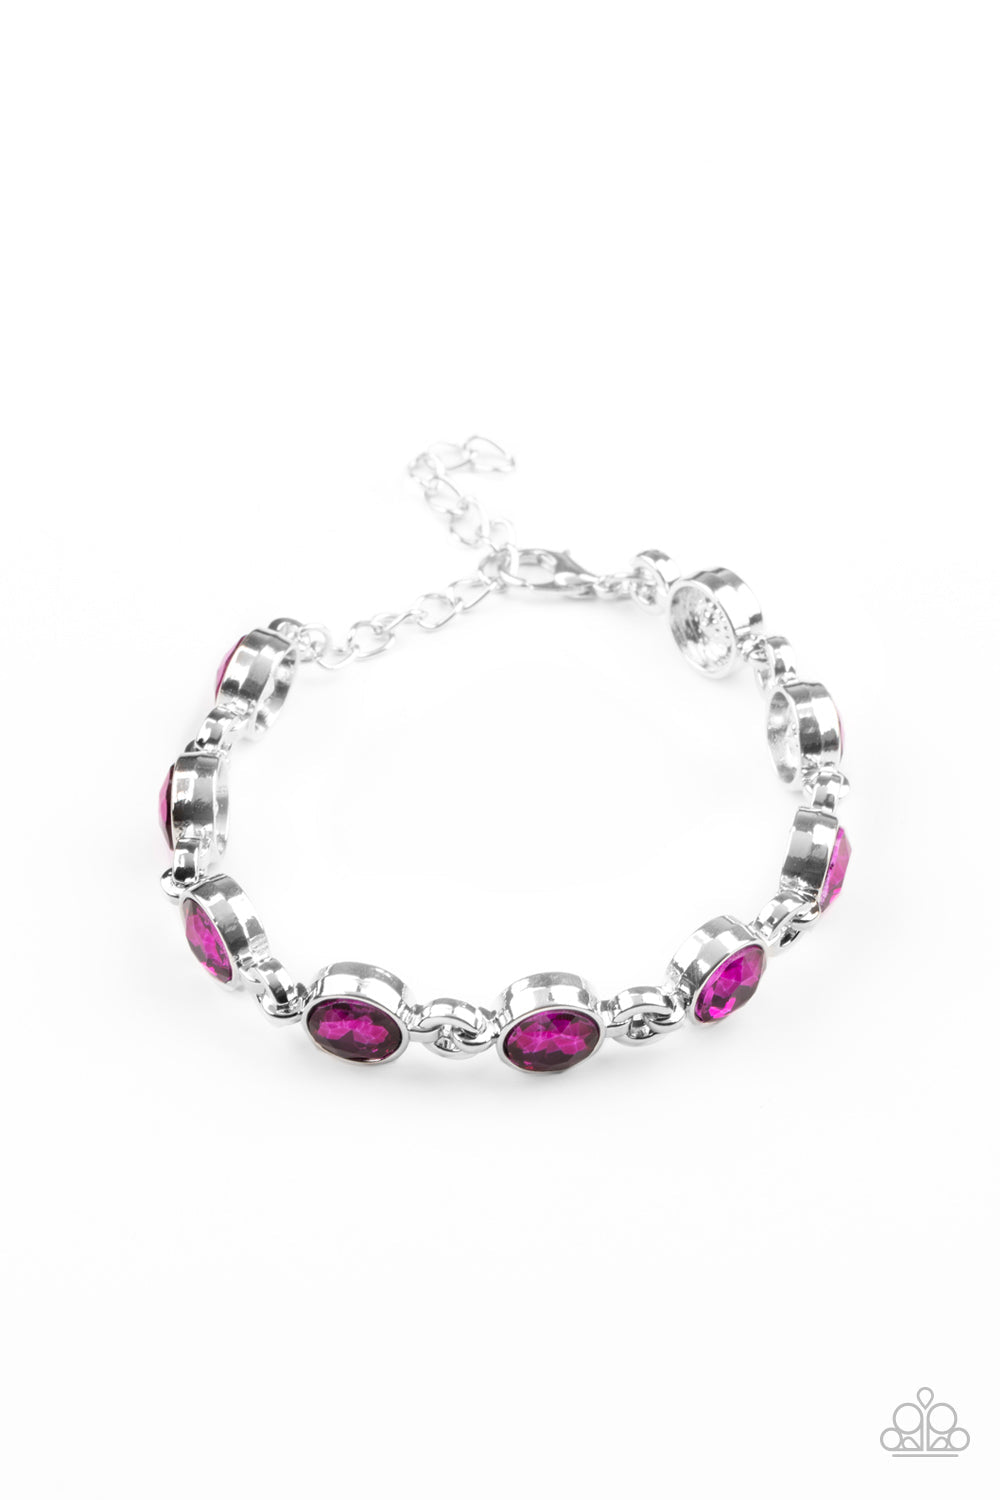 First In Fashion Show - Pink and Silver Bracelet - Paparazzi Accessories - Classic pink rhinestone encrusted silver frames delicately link around the wrist, creating a timeless centerpiece. Features an adjustable clasp closure. Sold as one individual bracelet. Trendy fashion jewelry for everyone.